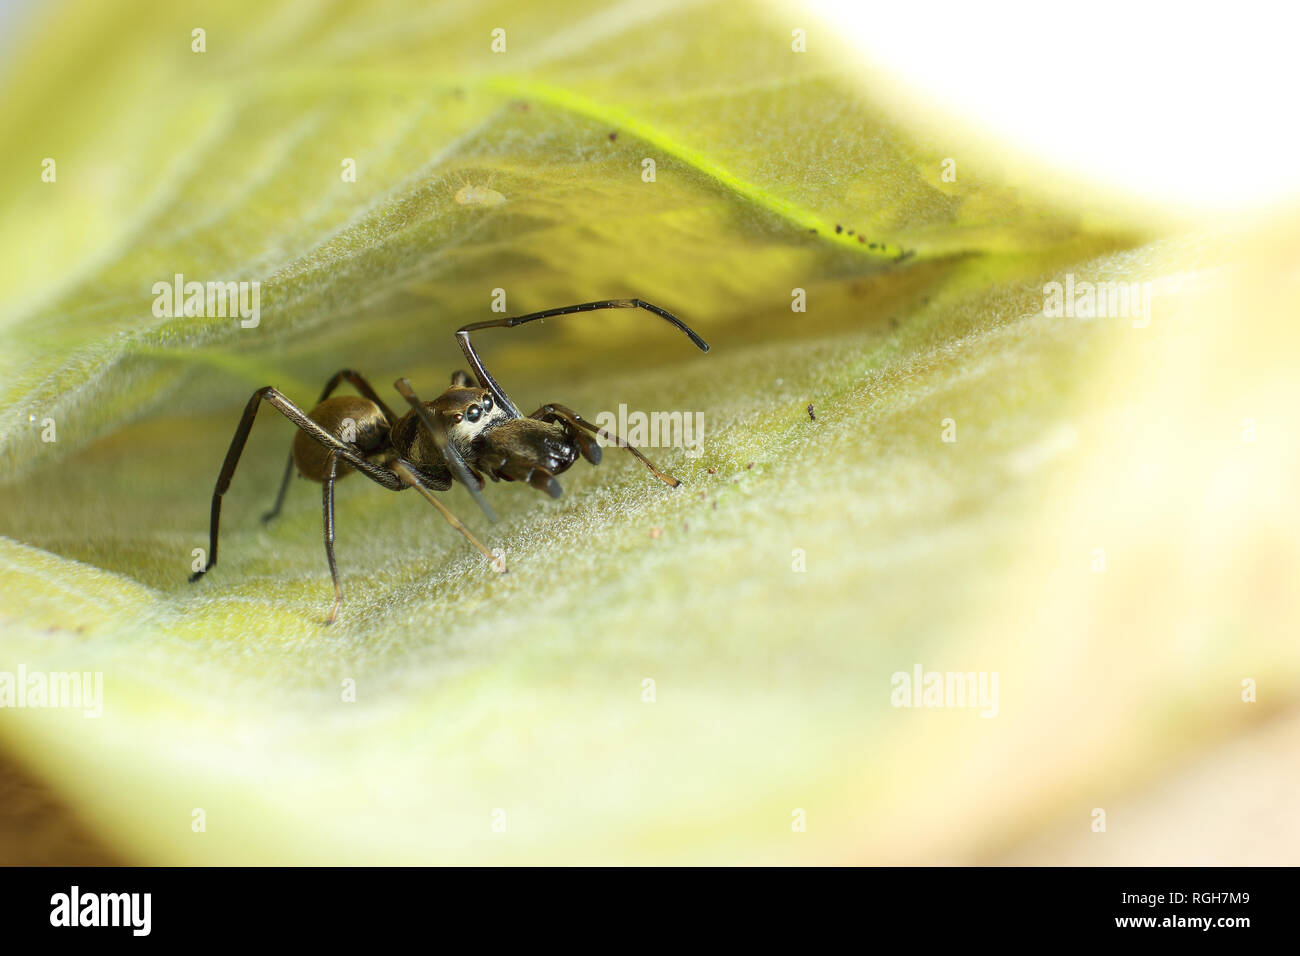 Ant mimic spider on the leaf, macro Stock Photo